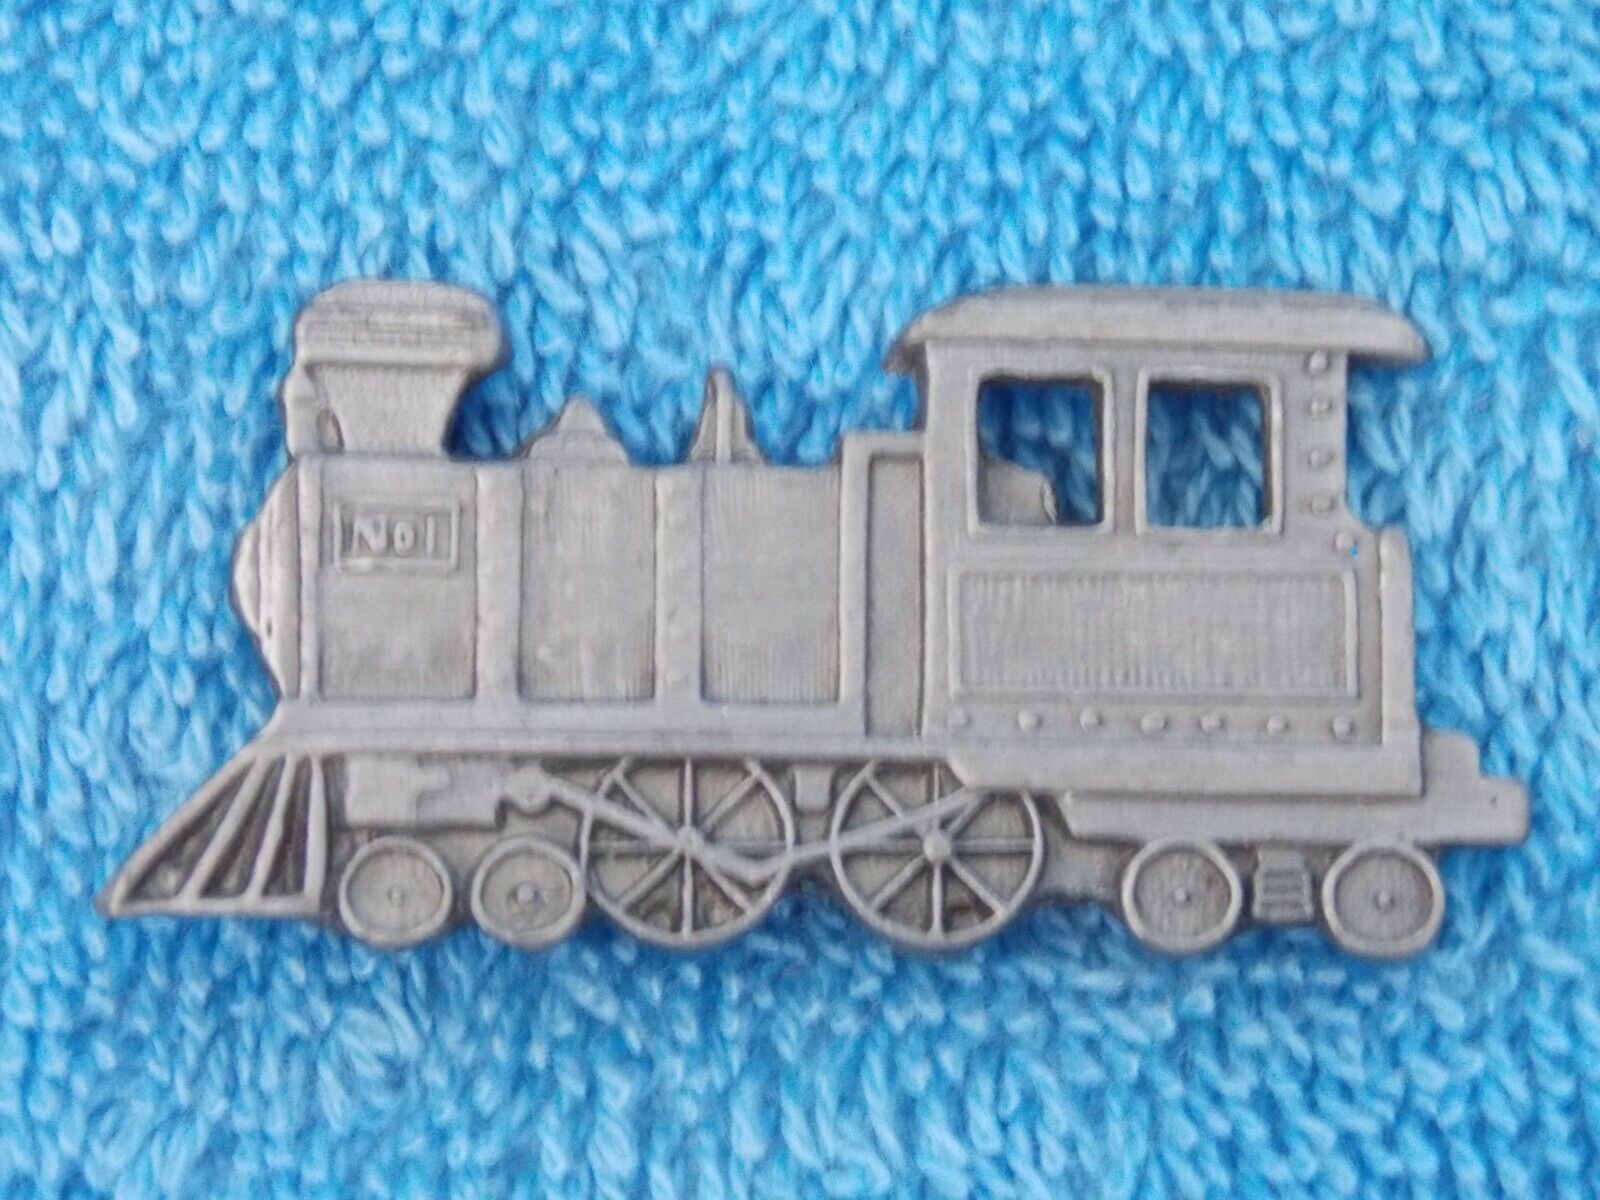  A vintage train-themed birthday party magnet